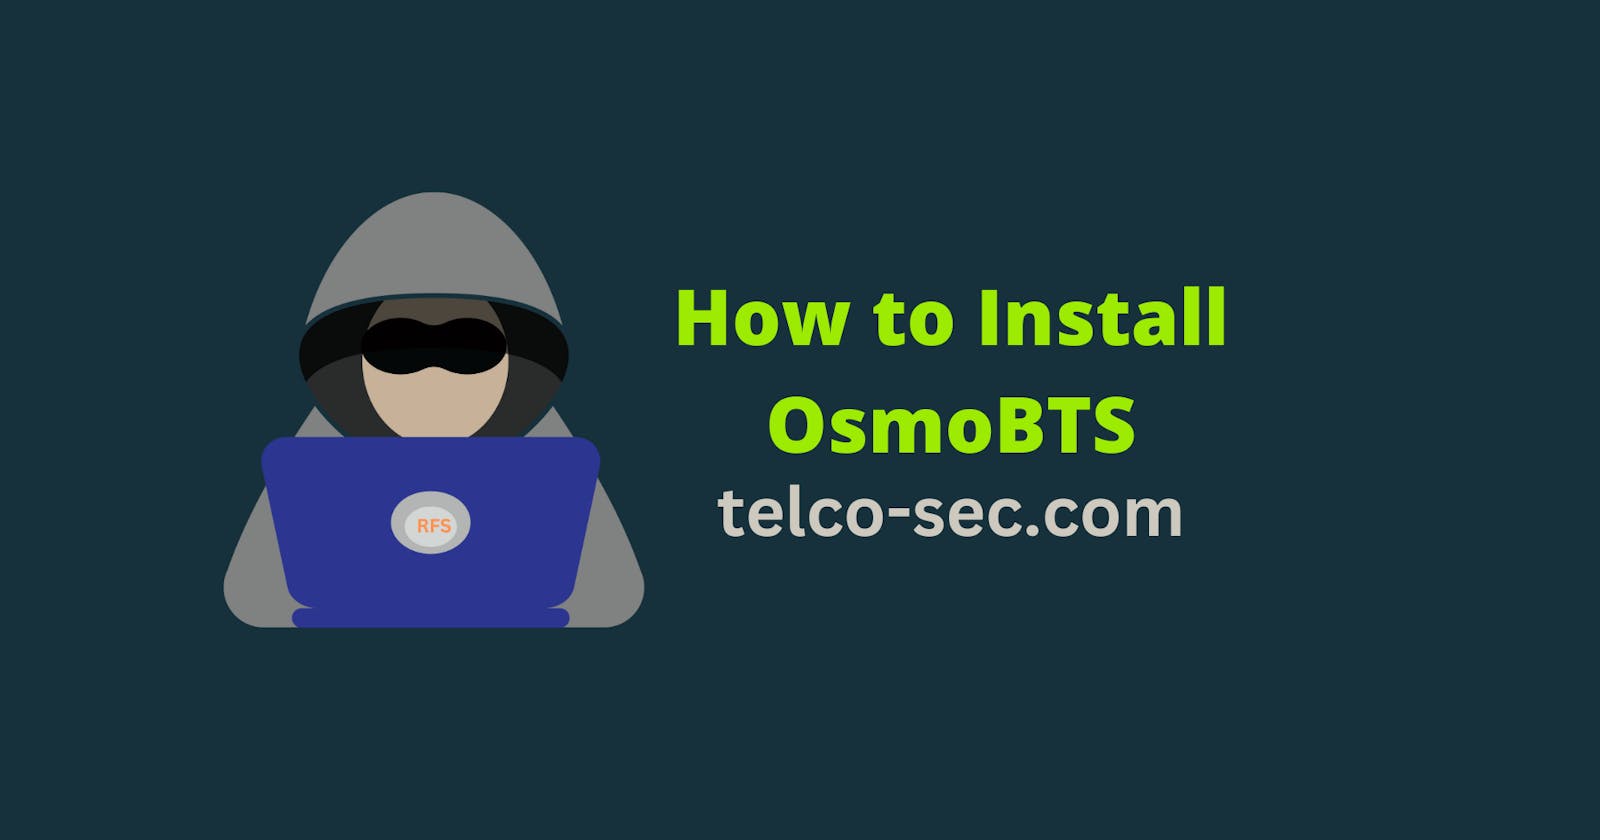 How to Install OsmoBTS